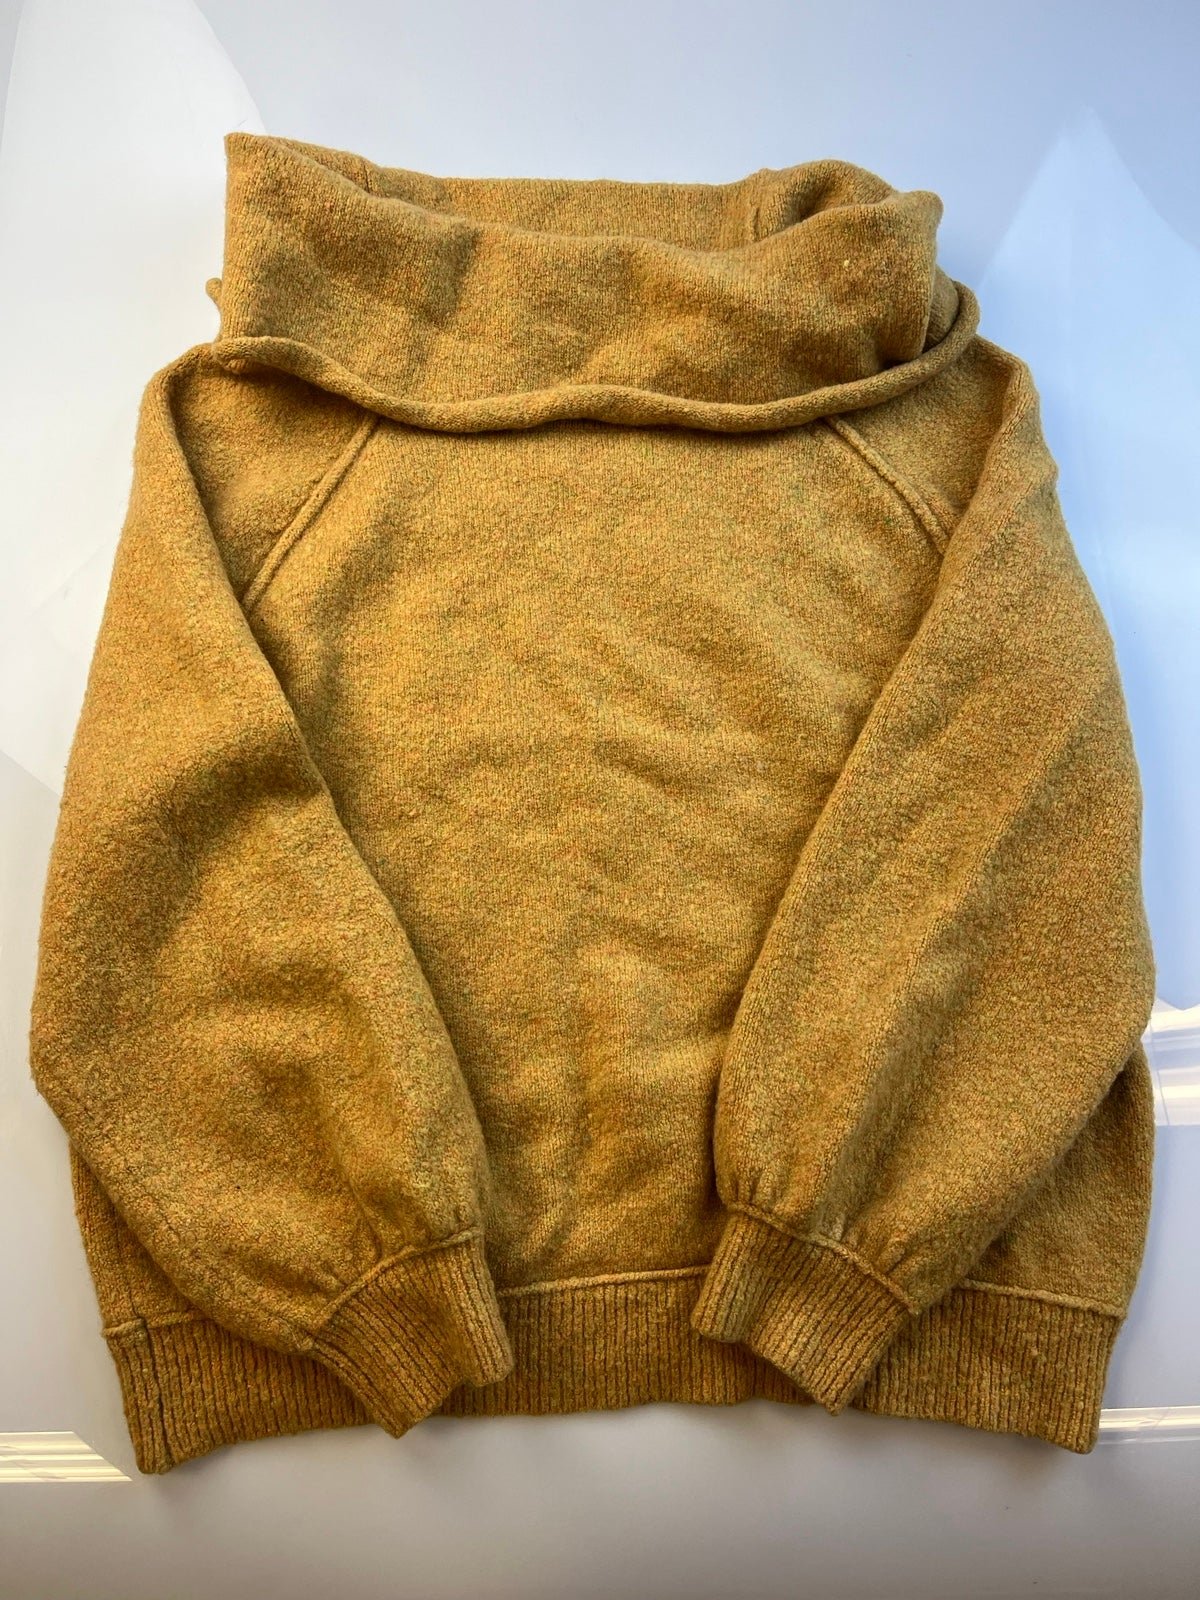 Amazing Free People cowl neck Sweater r40-31 O3FN9Wyss hot sale